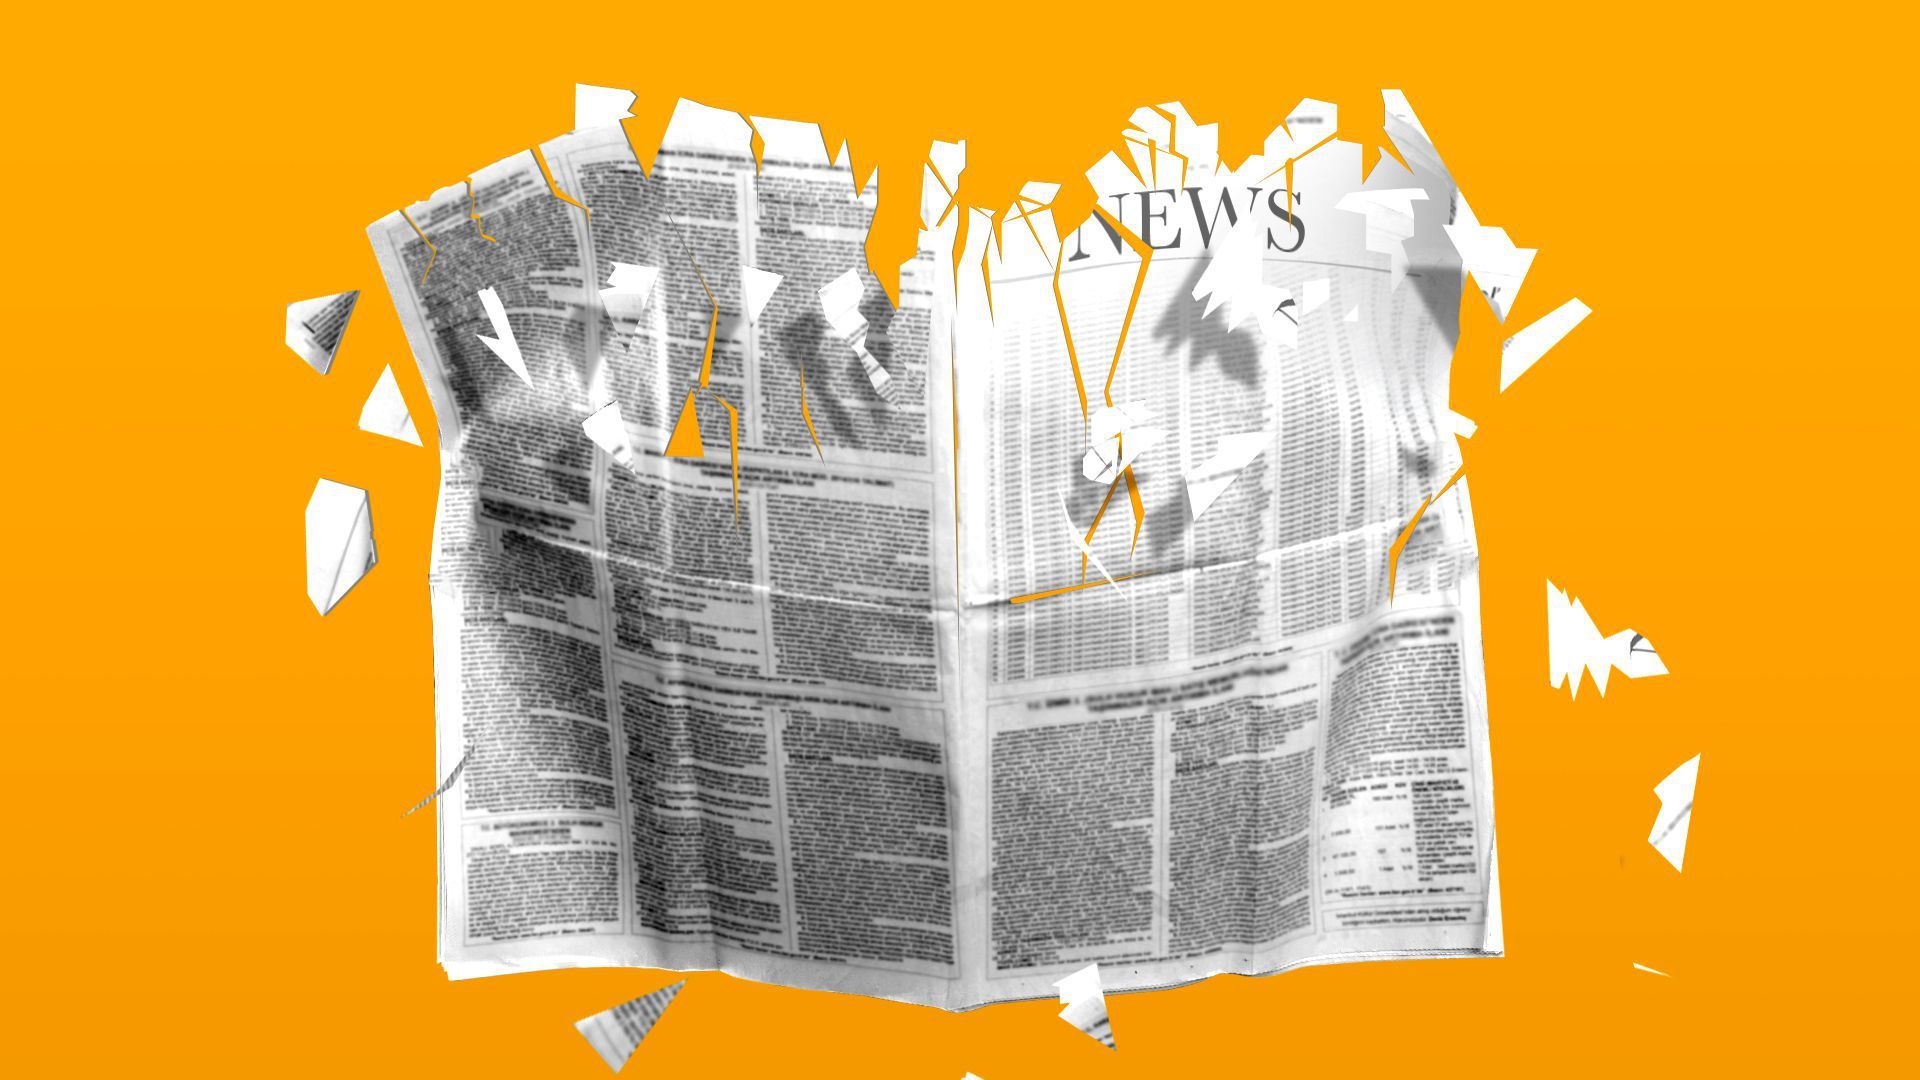 Illustration of a newspaper in shreds against a yellow background.